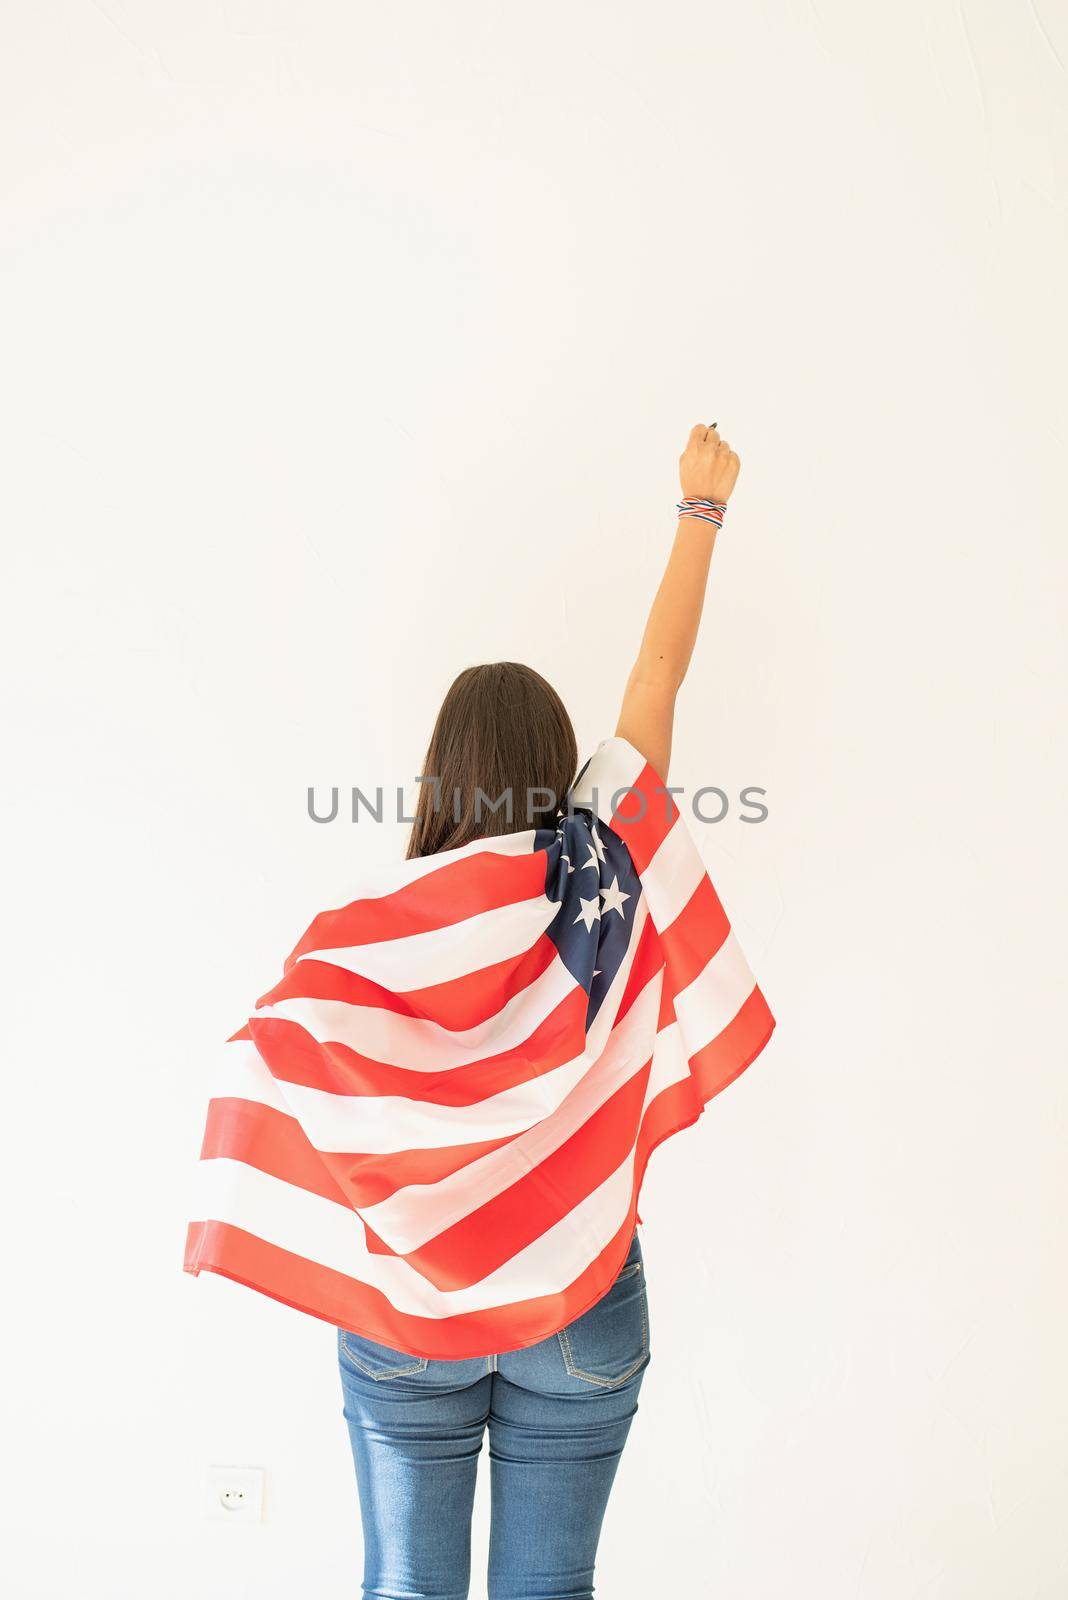 Independence day of the USA. Happy July 4th. young woman with american flag, view from behind. Copy space